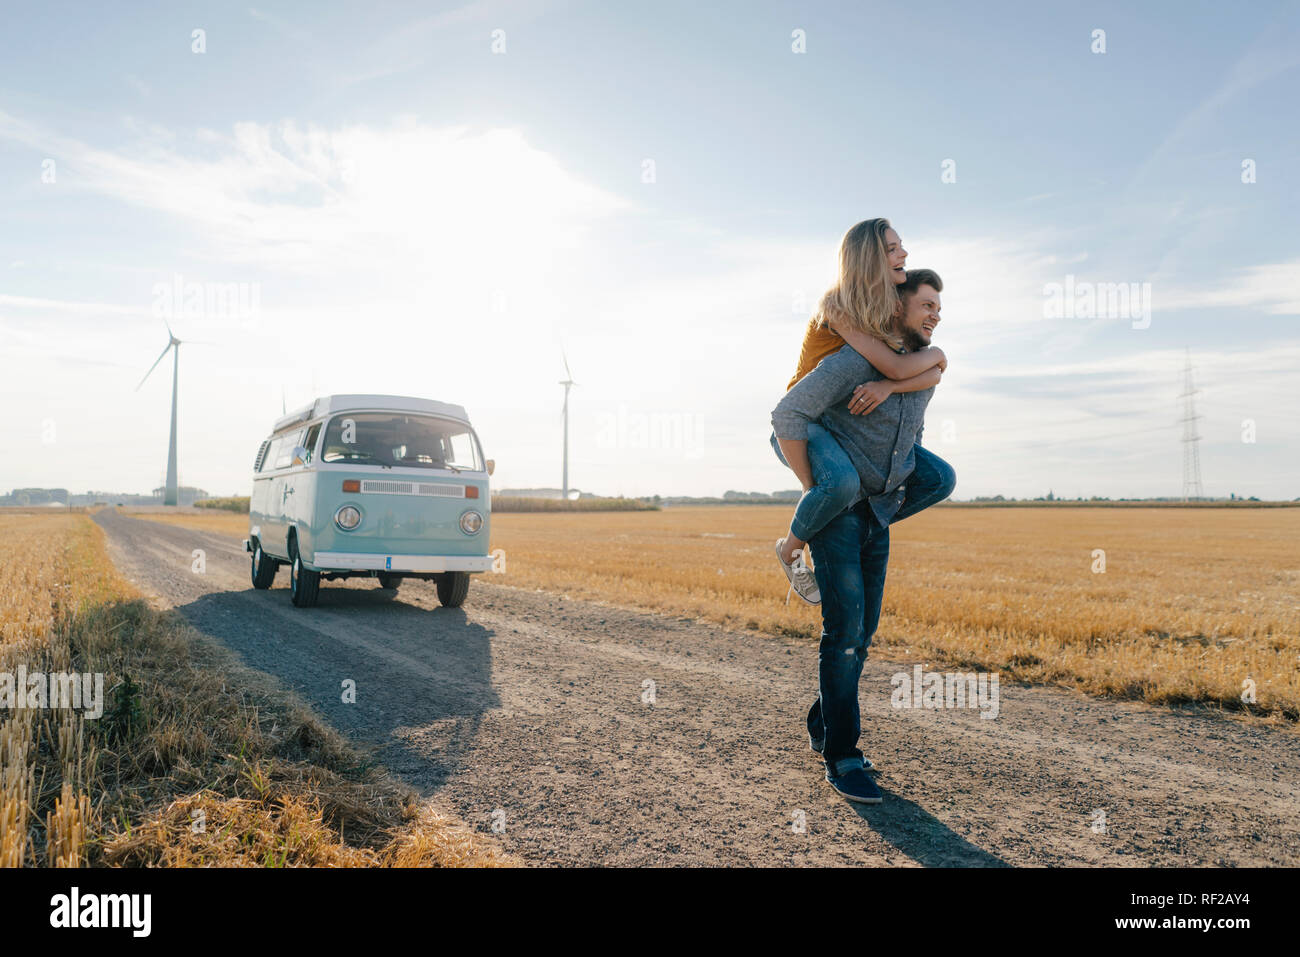 Young man carrying girlfriend piggyback on dirt track at camper van in rural landscape Stock Photo